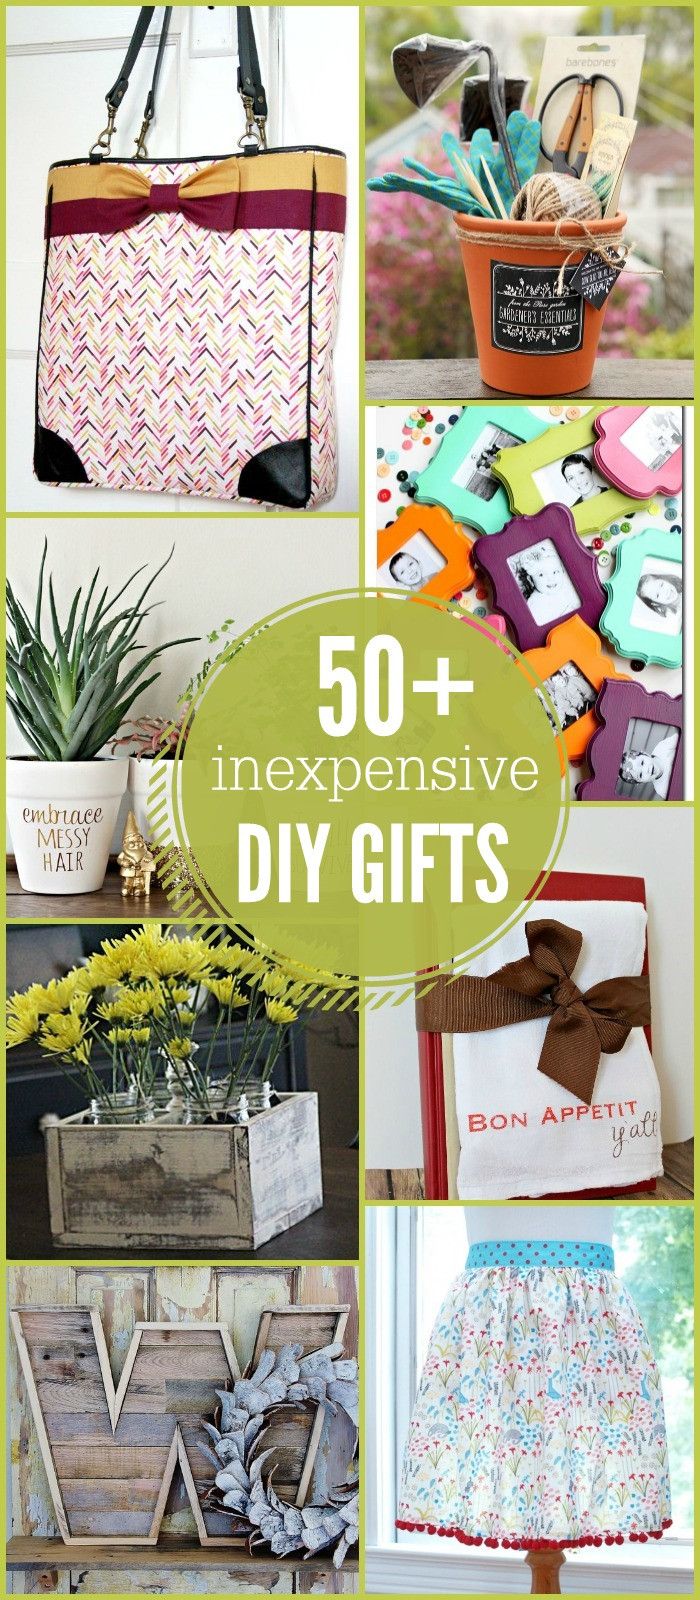 Great DIY Christmas Gifts
 50 Inexpensive DIY Gift Ideas